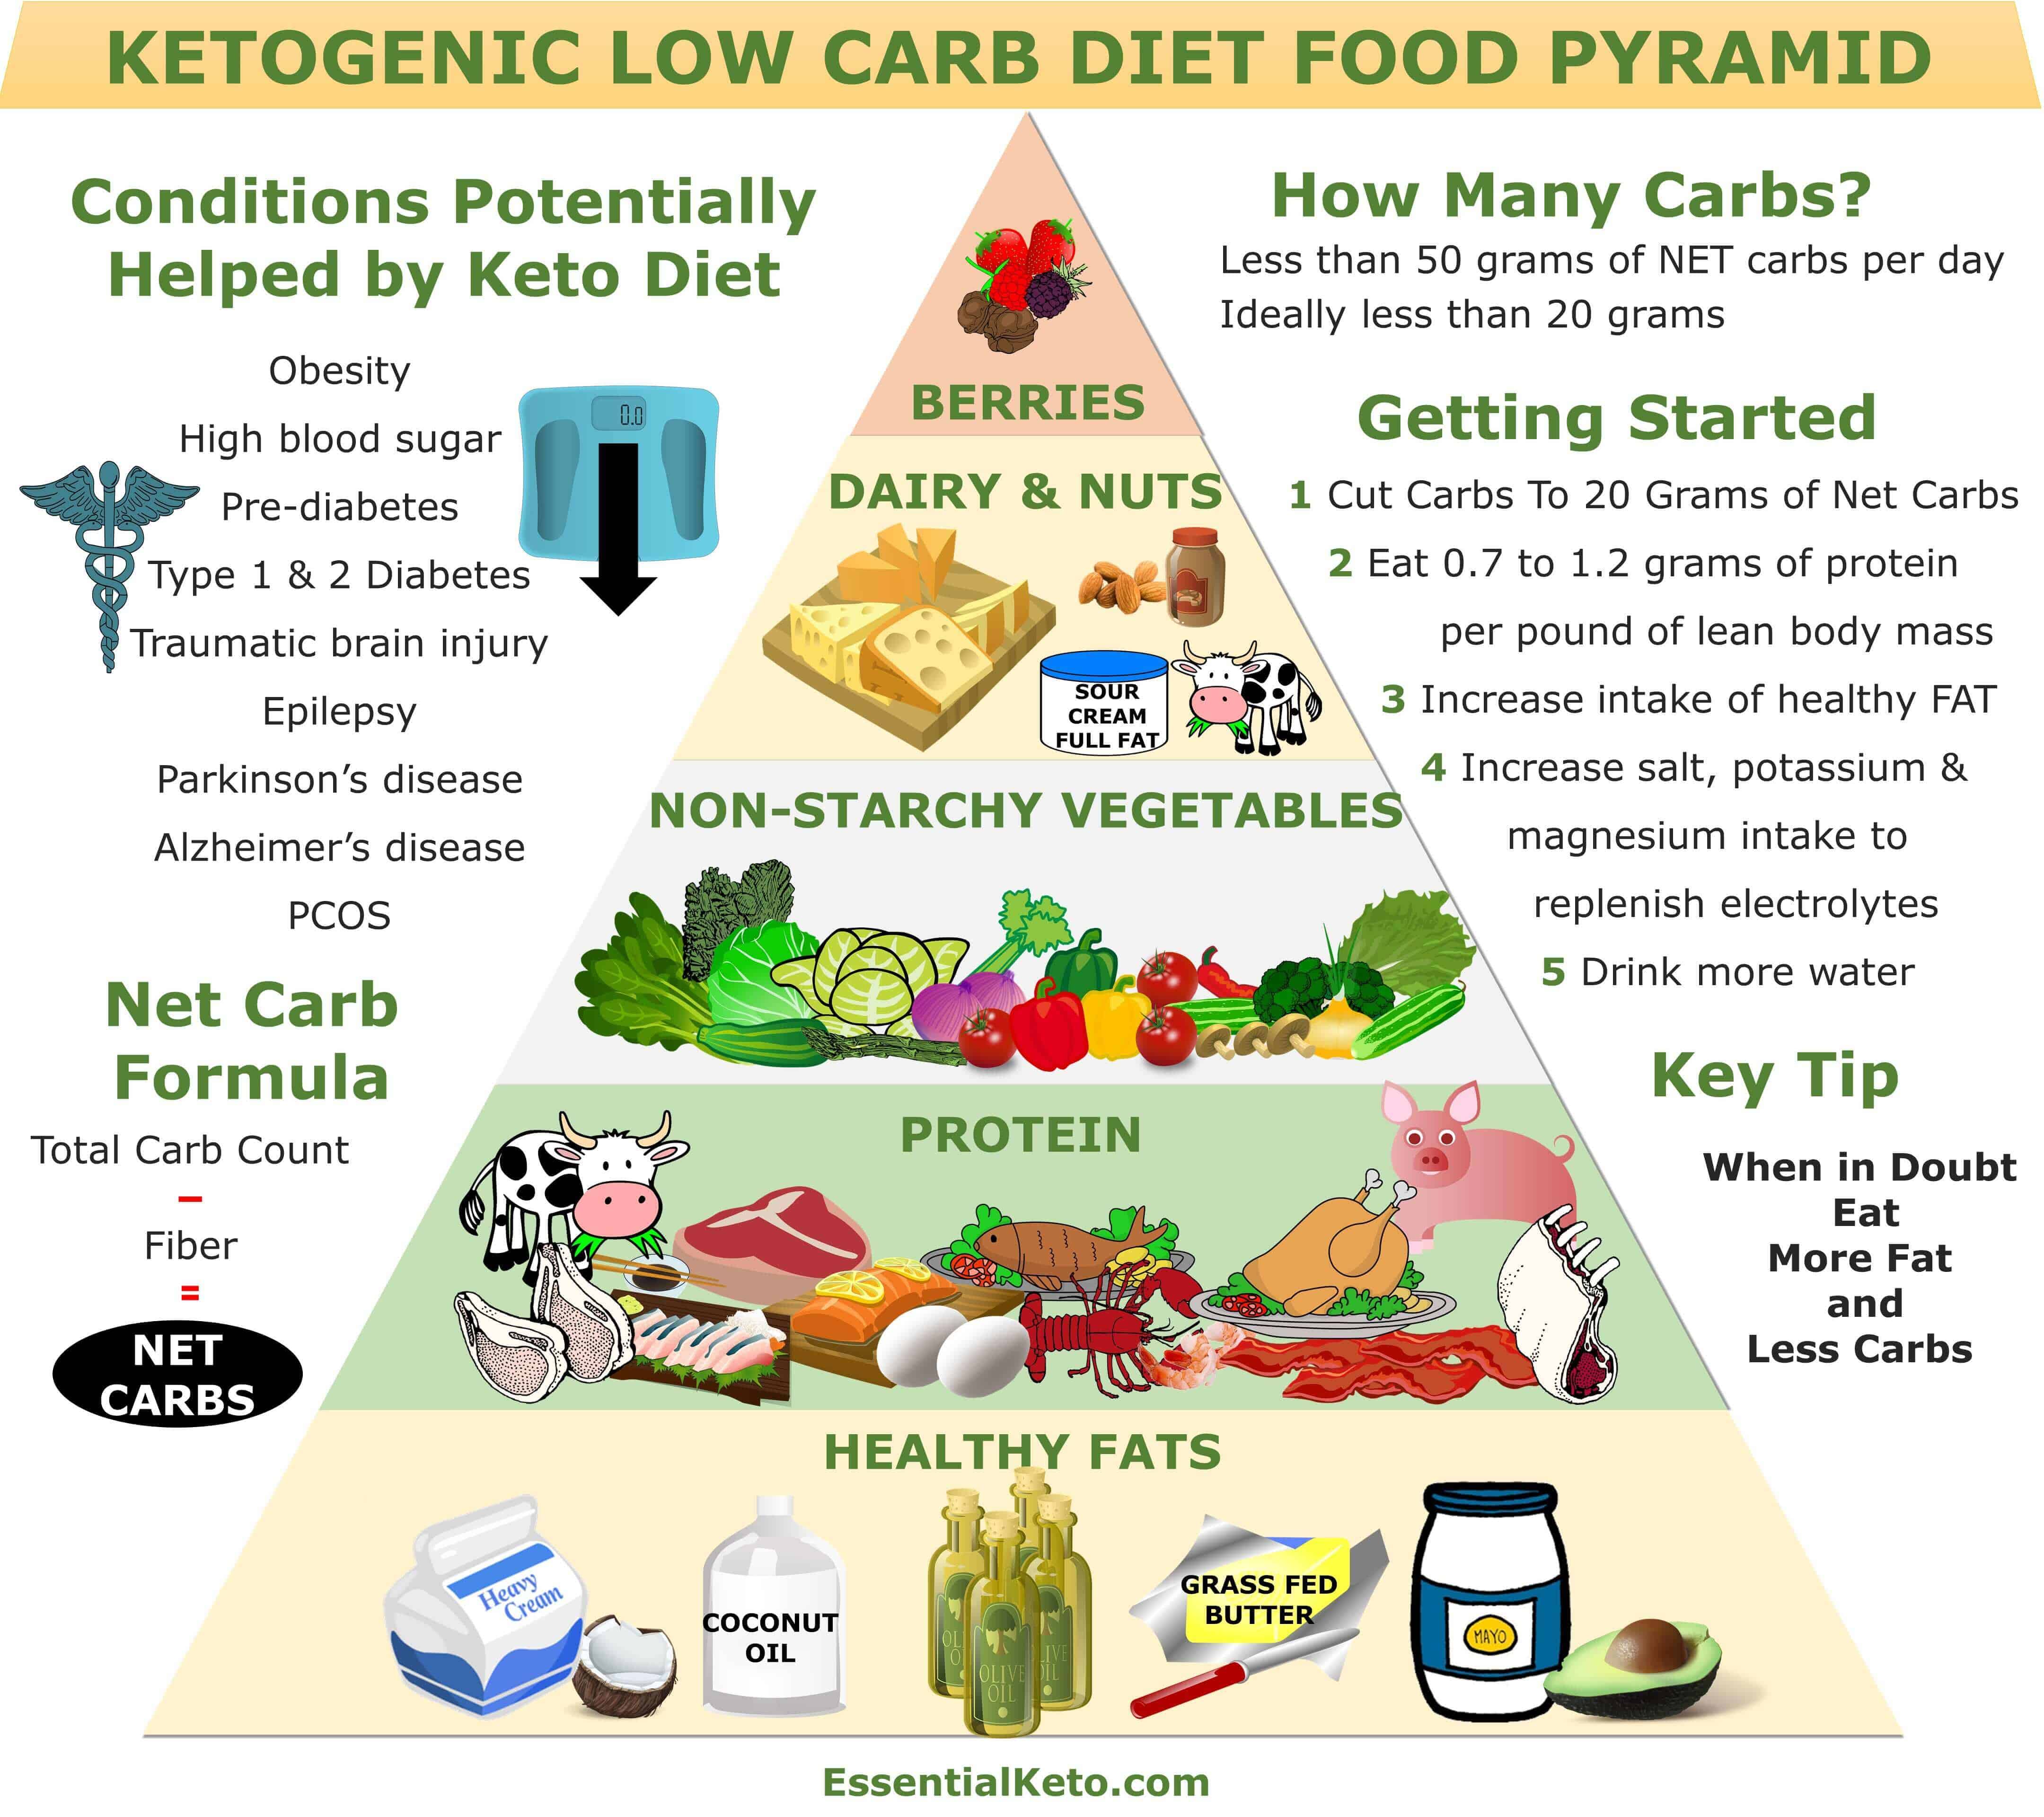 what is the keto diet